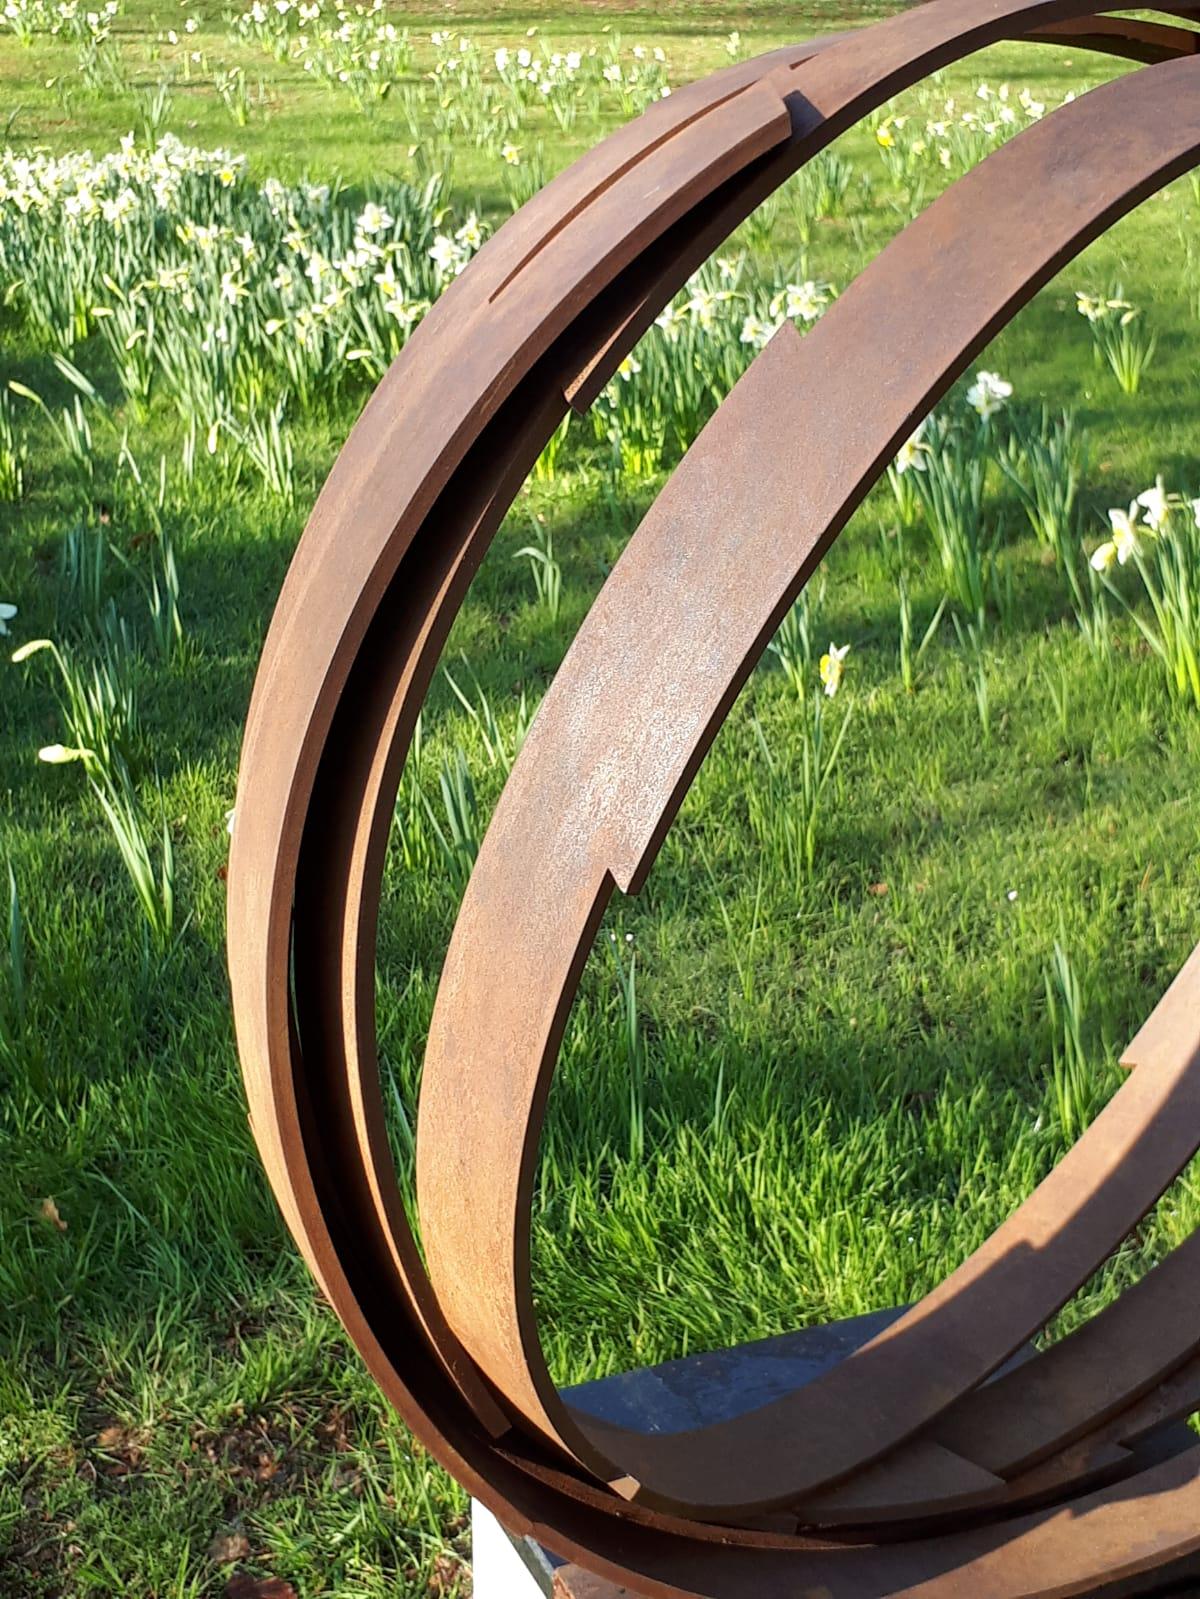 Large Orbit by Kuno Vollet - Contemporary Rusted Steel sculpture for Outdoors 1